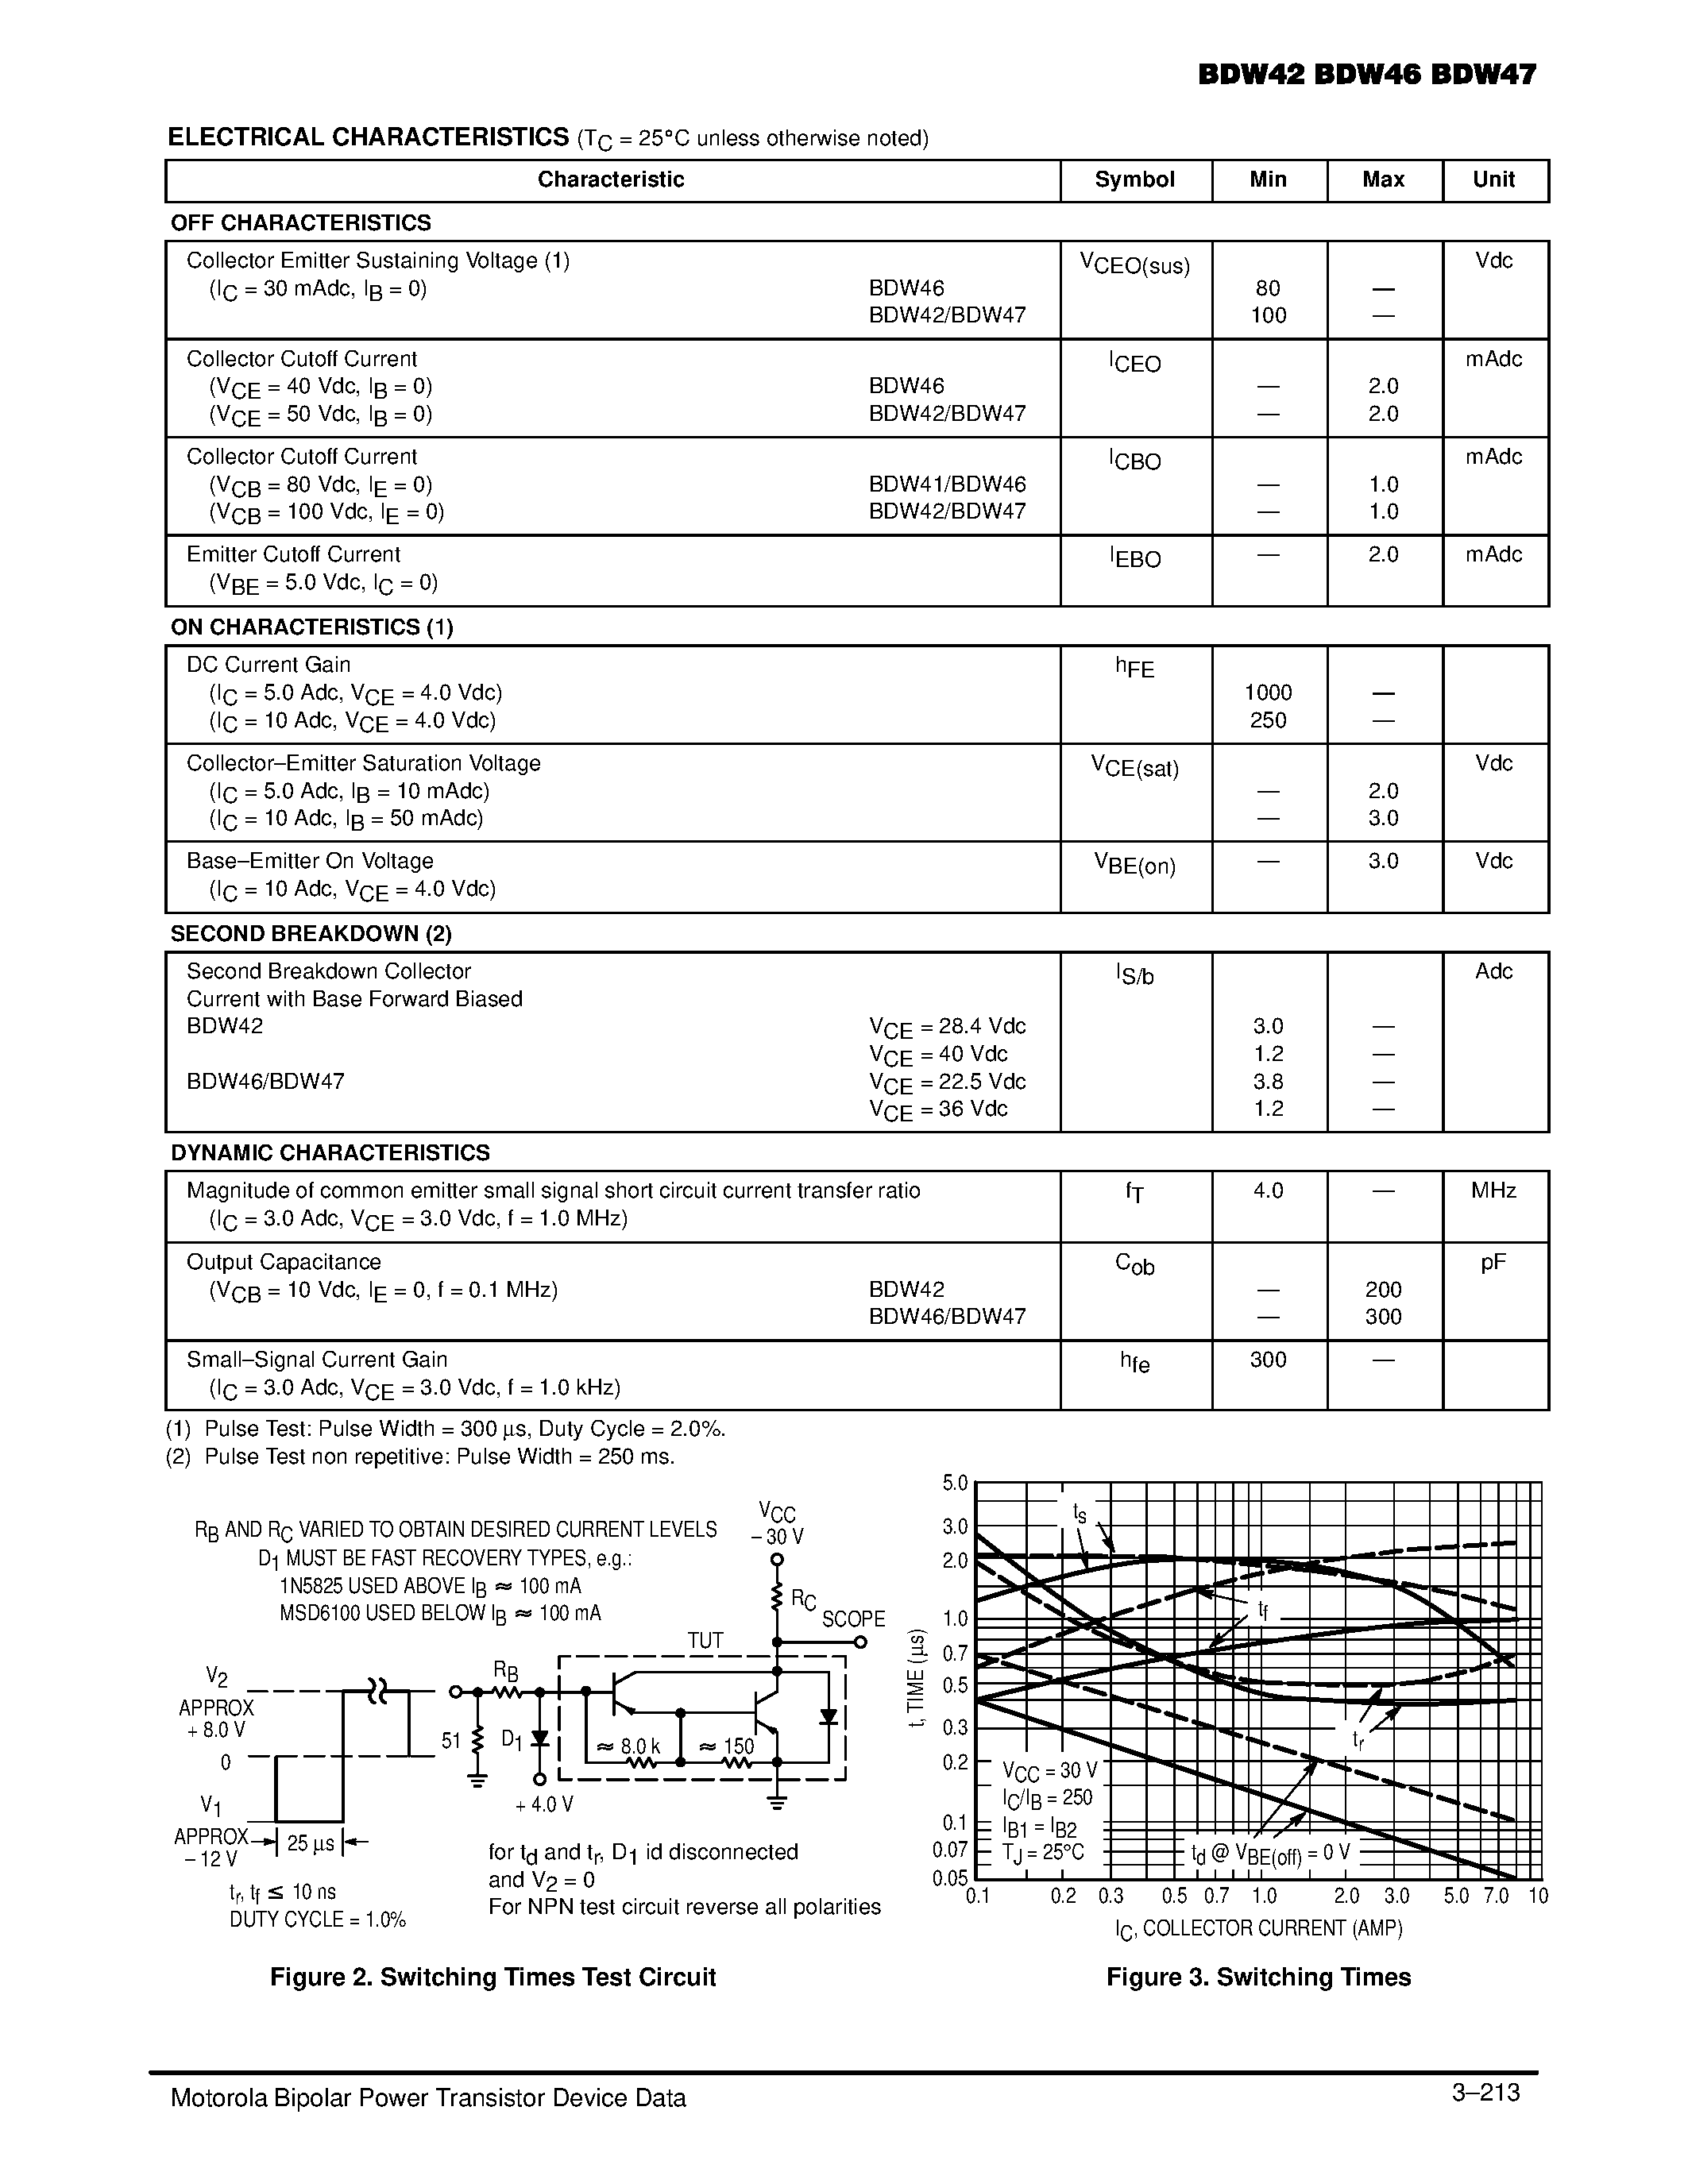 Datasheet BDW42 - Darlington Complementary Silicon Power Transistors page 2